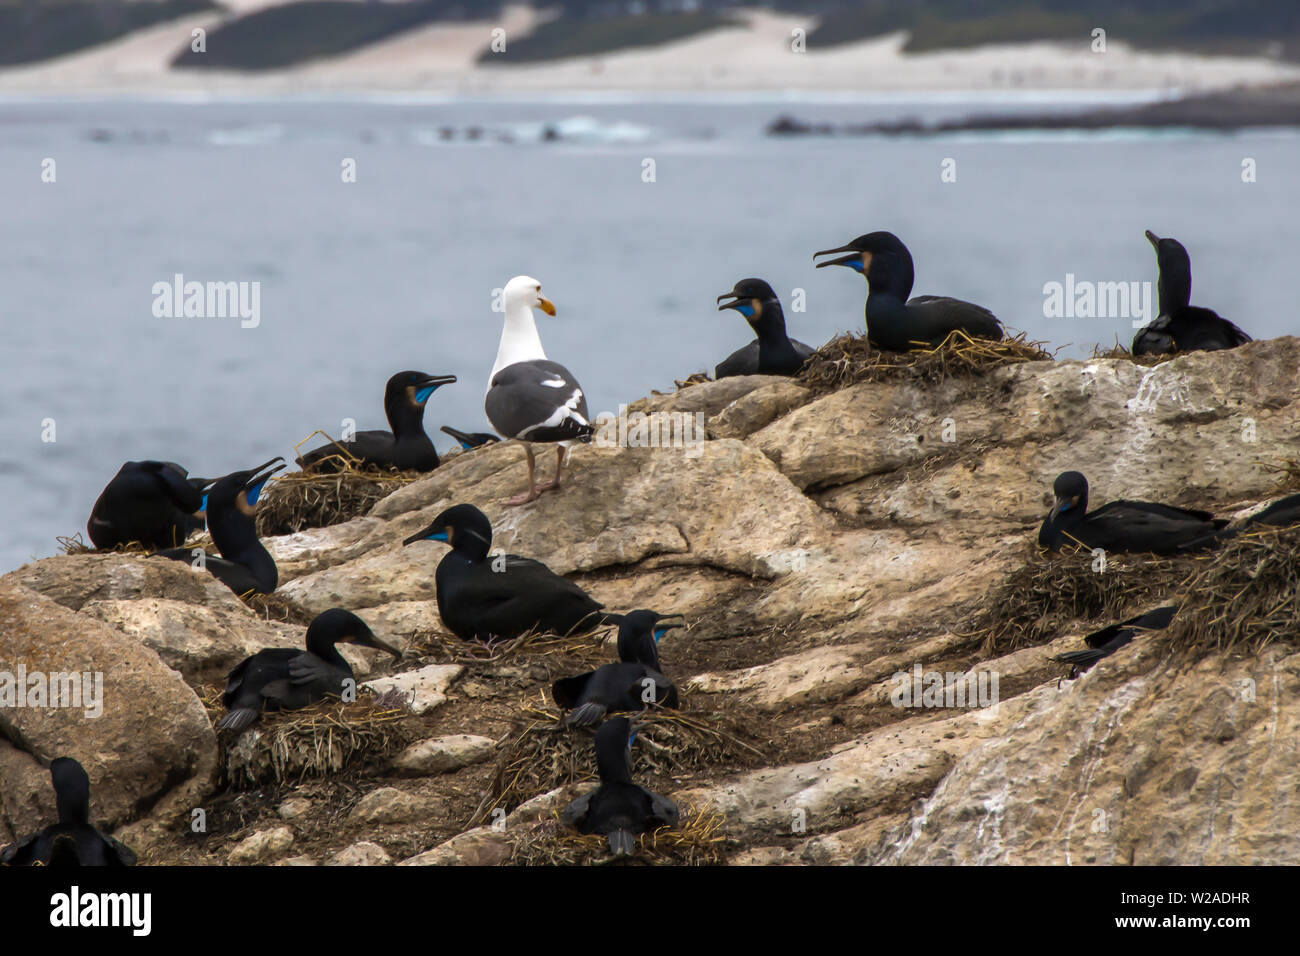 Single Seagull stands among nests of Brandt’s Cormorant sea birds as they all stare at each other. Stock Photo